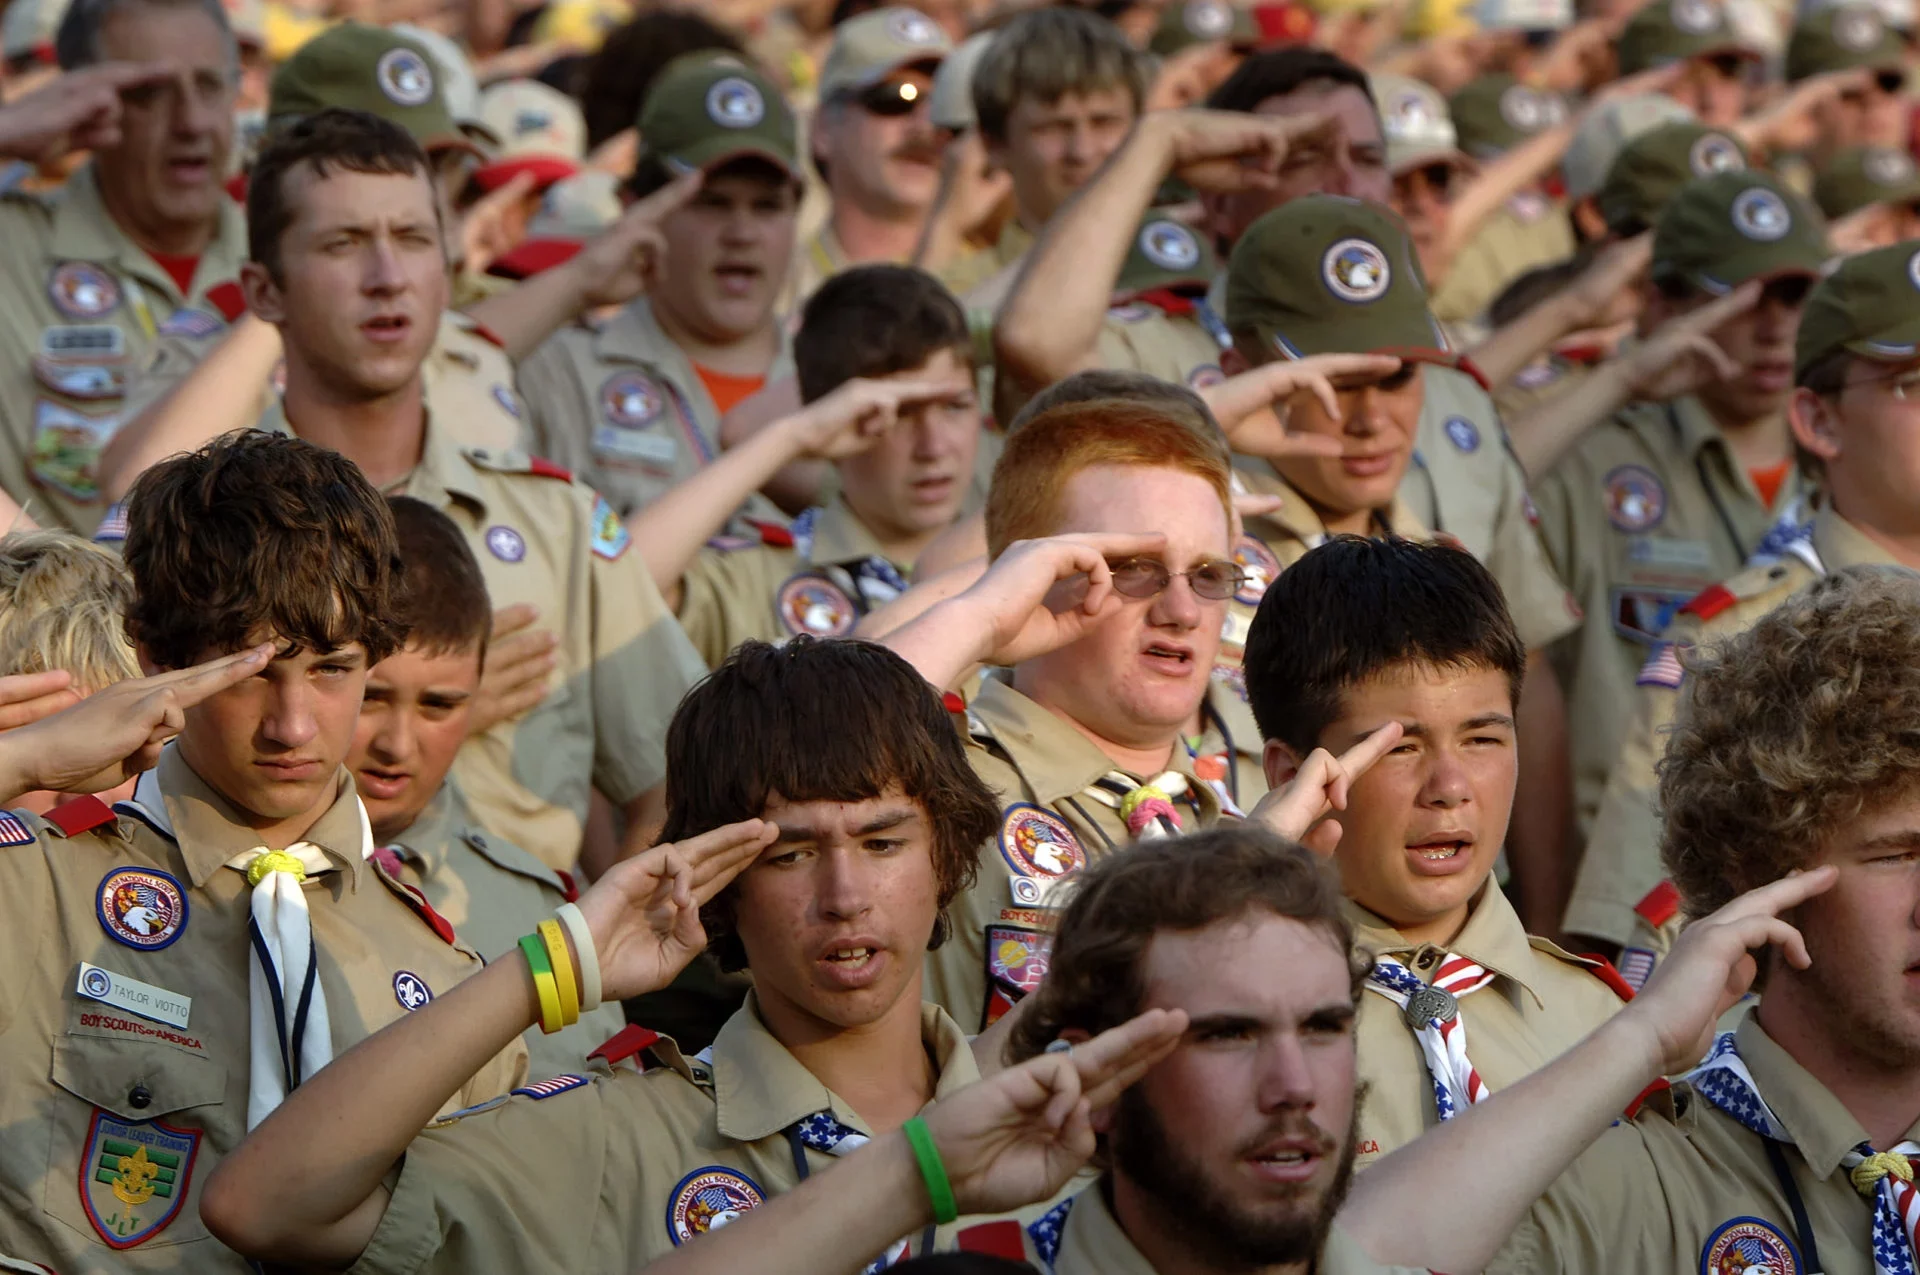 Why the Boy Scouts’ new policy benefits boys and girls